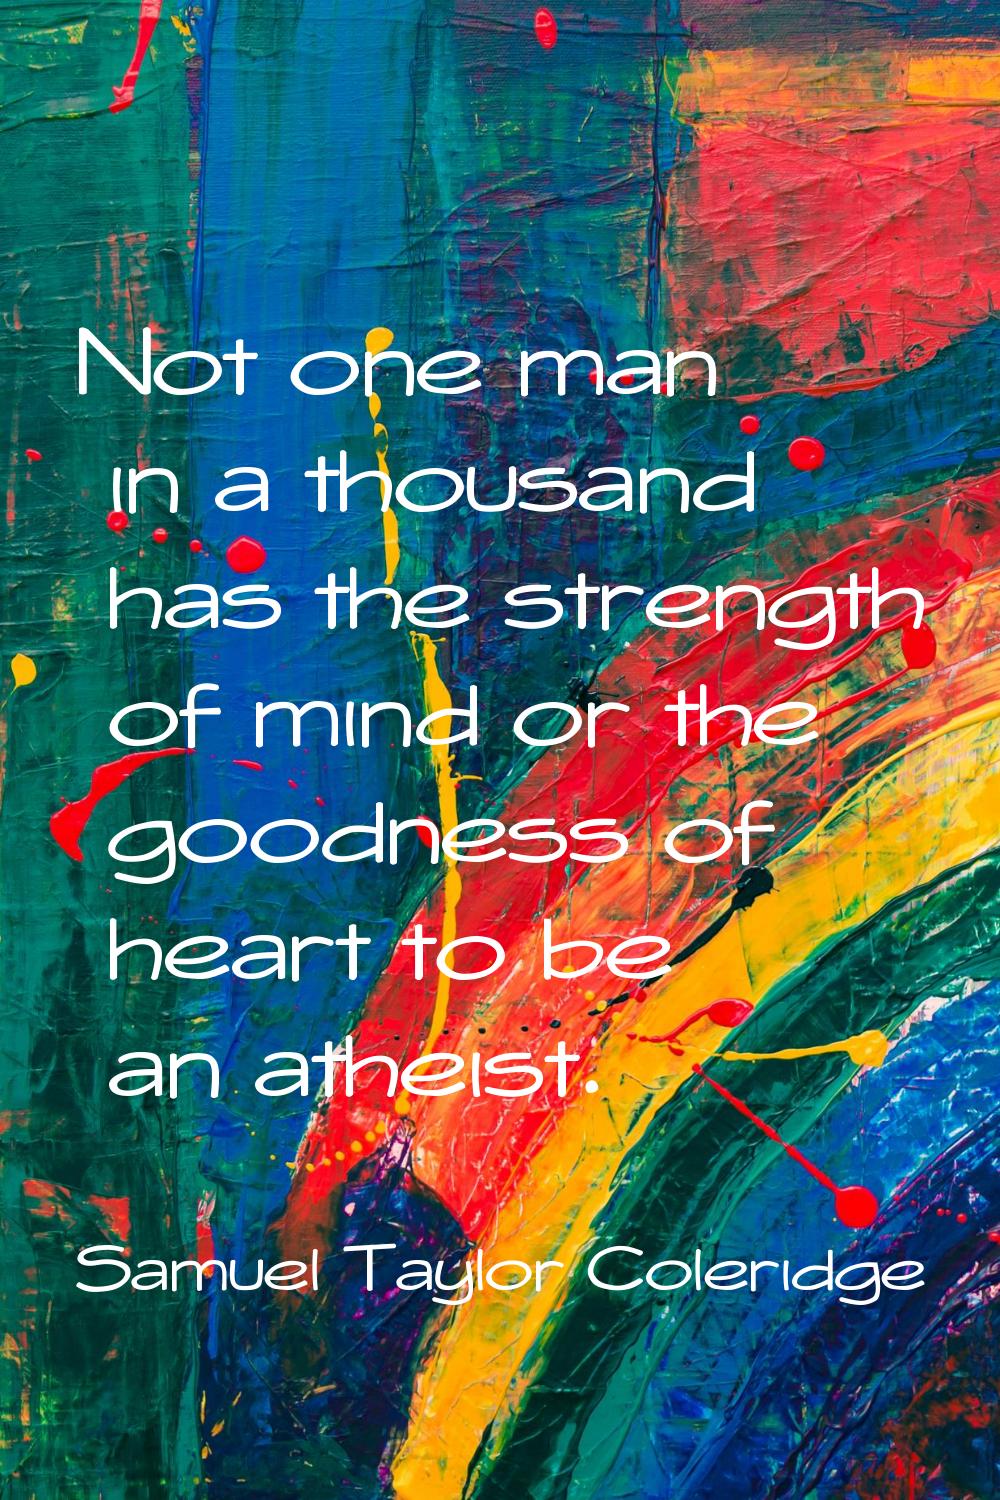 Not one man in a thousand has the strength of mind or the goodness of heart to be an atheist.